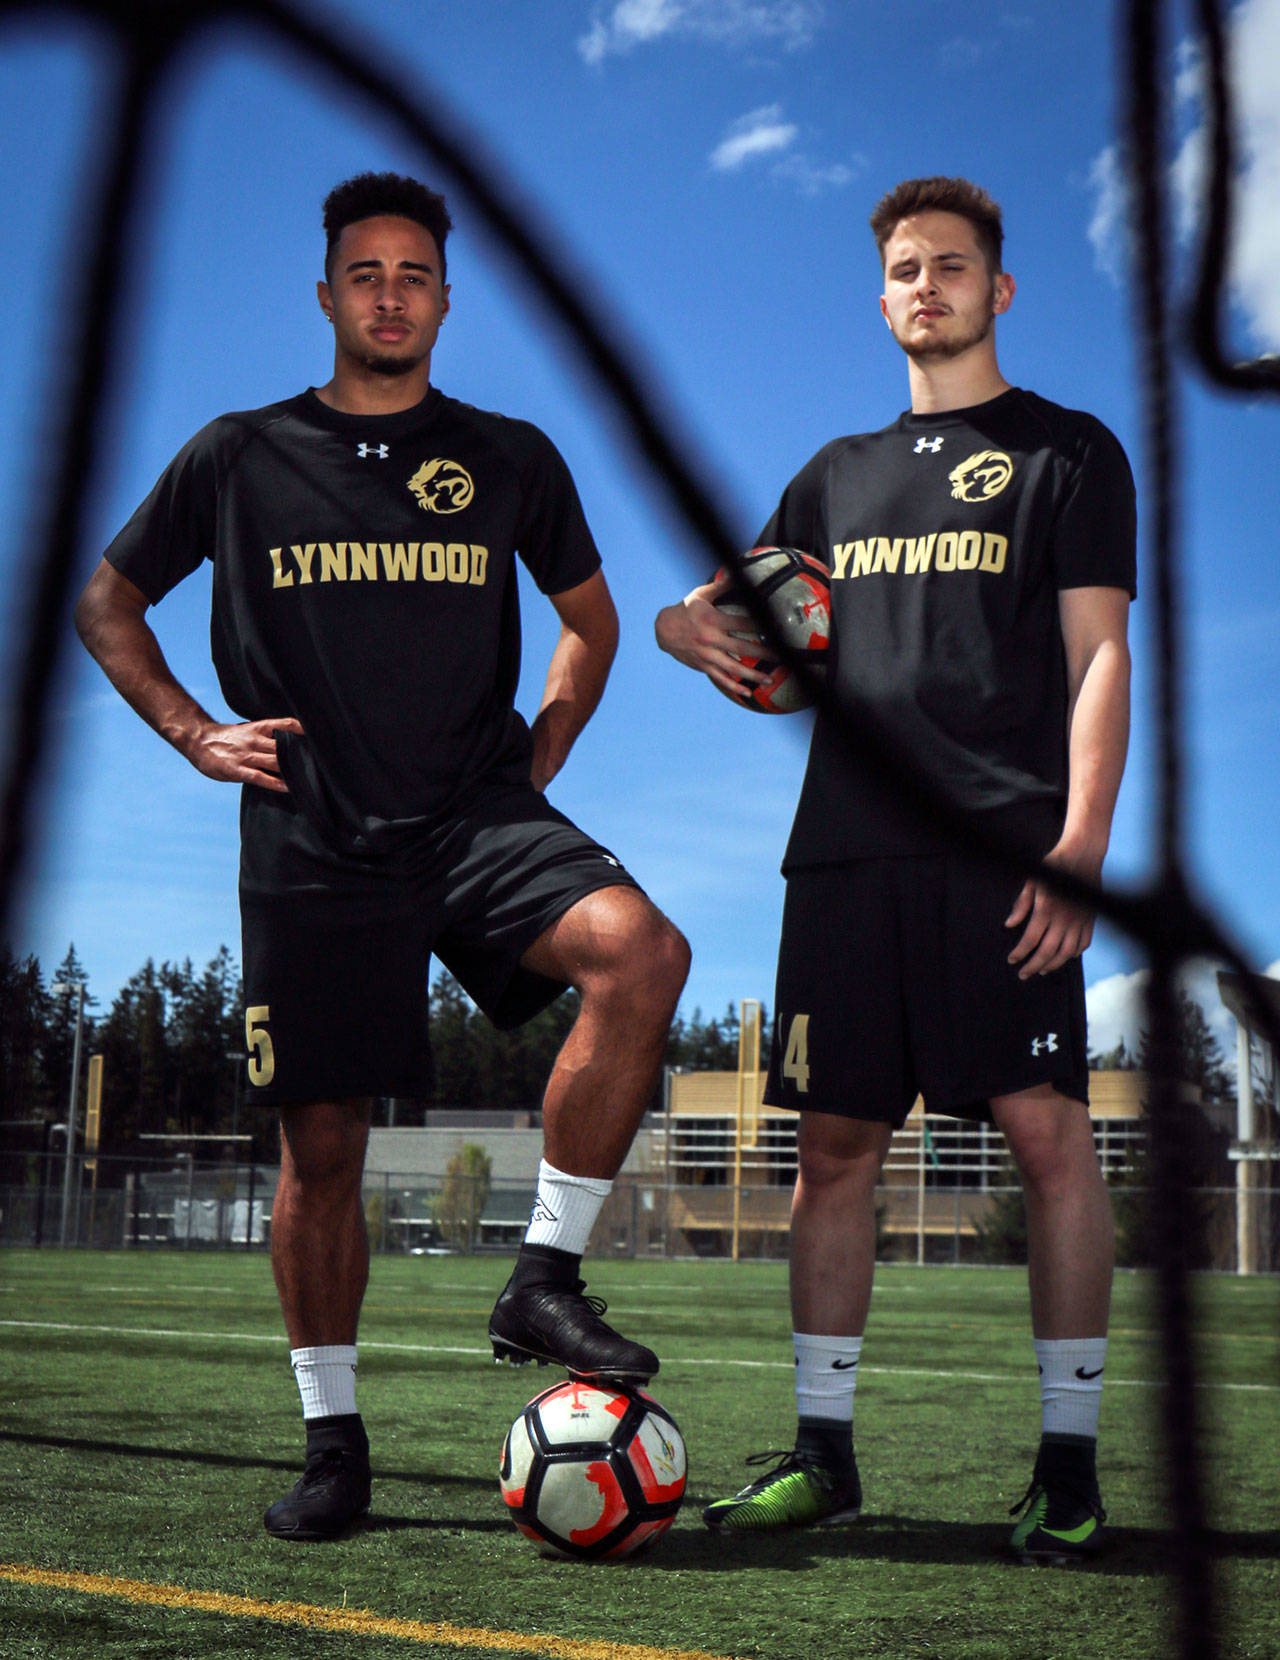 Lynnwood seniors Ryley Johnson (left) and Dane Evanger have combined to form a dominant goal-scoring duo up front for the Royals. They will attend Highland Community College in the fall. (Kevin Clark / The Herald)